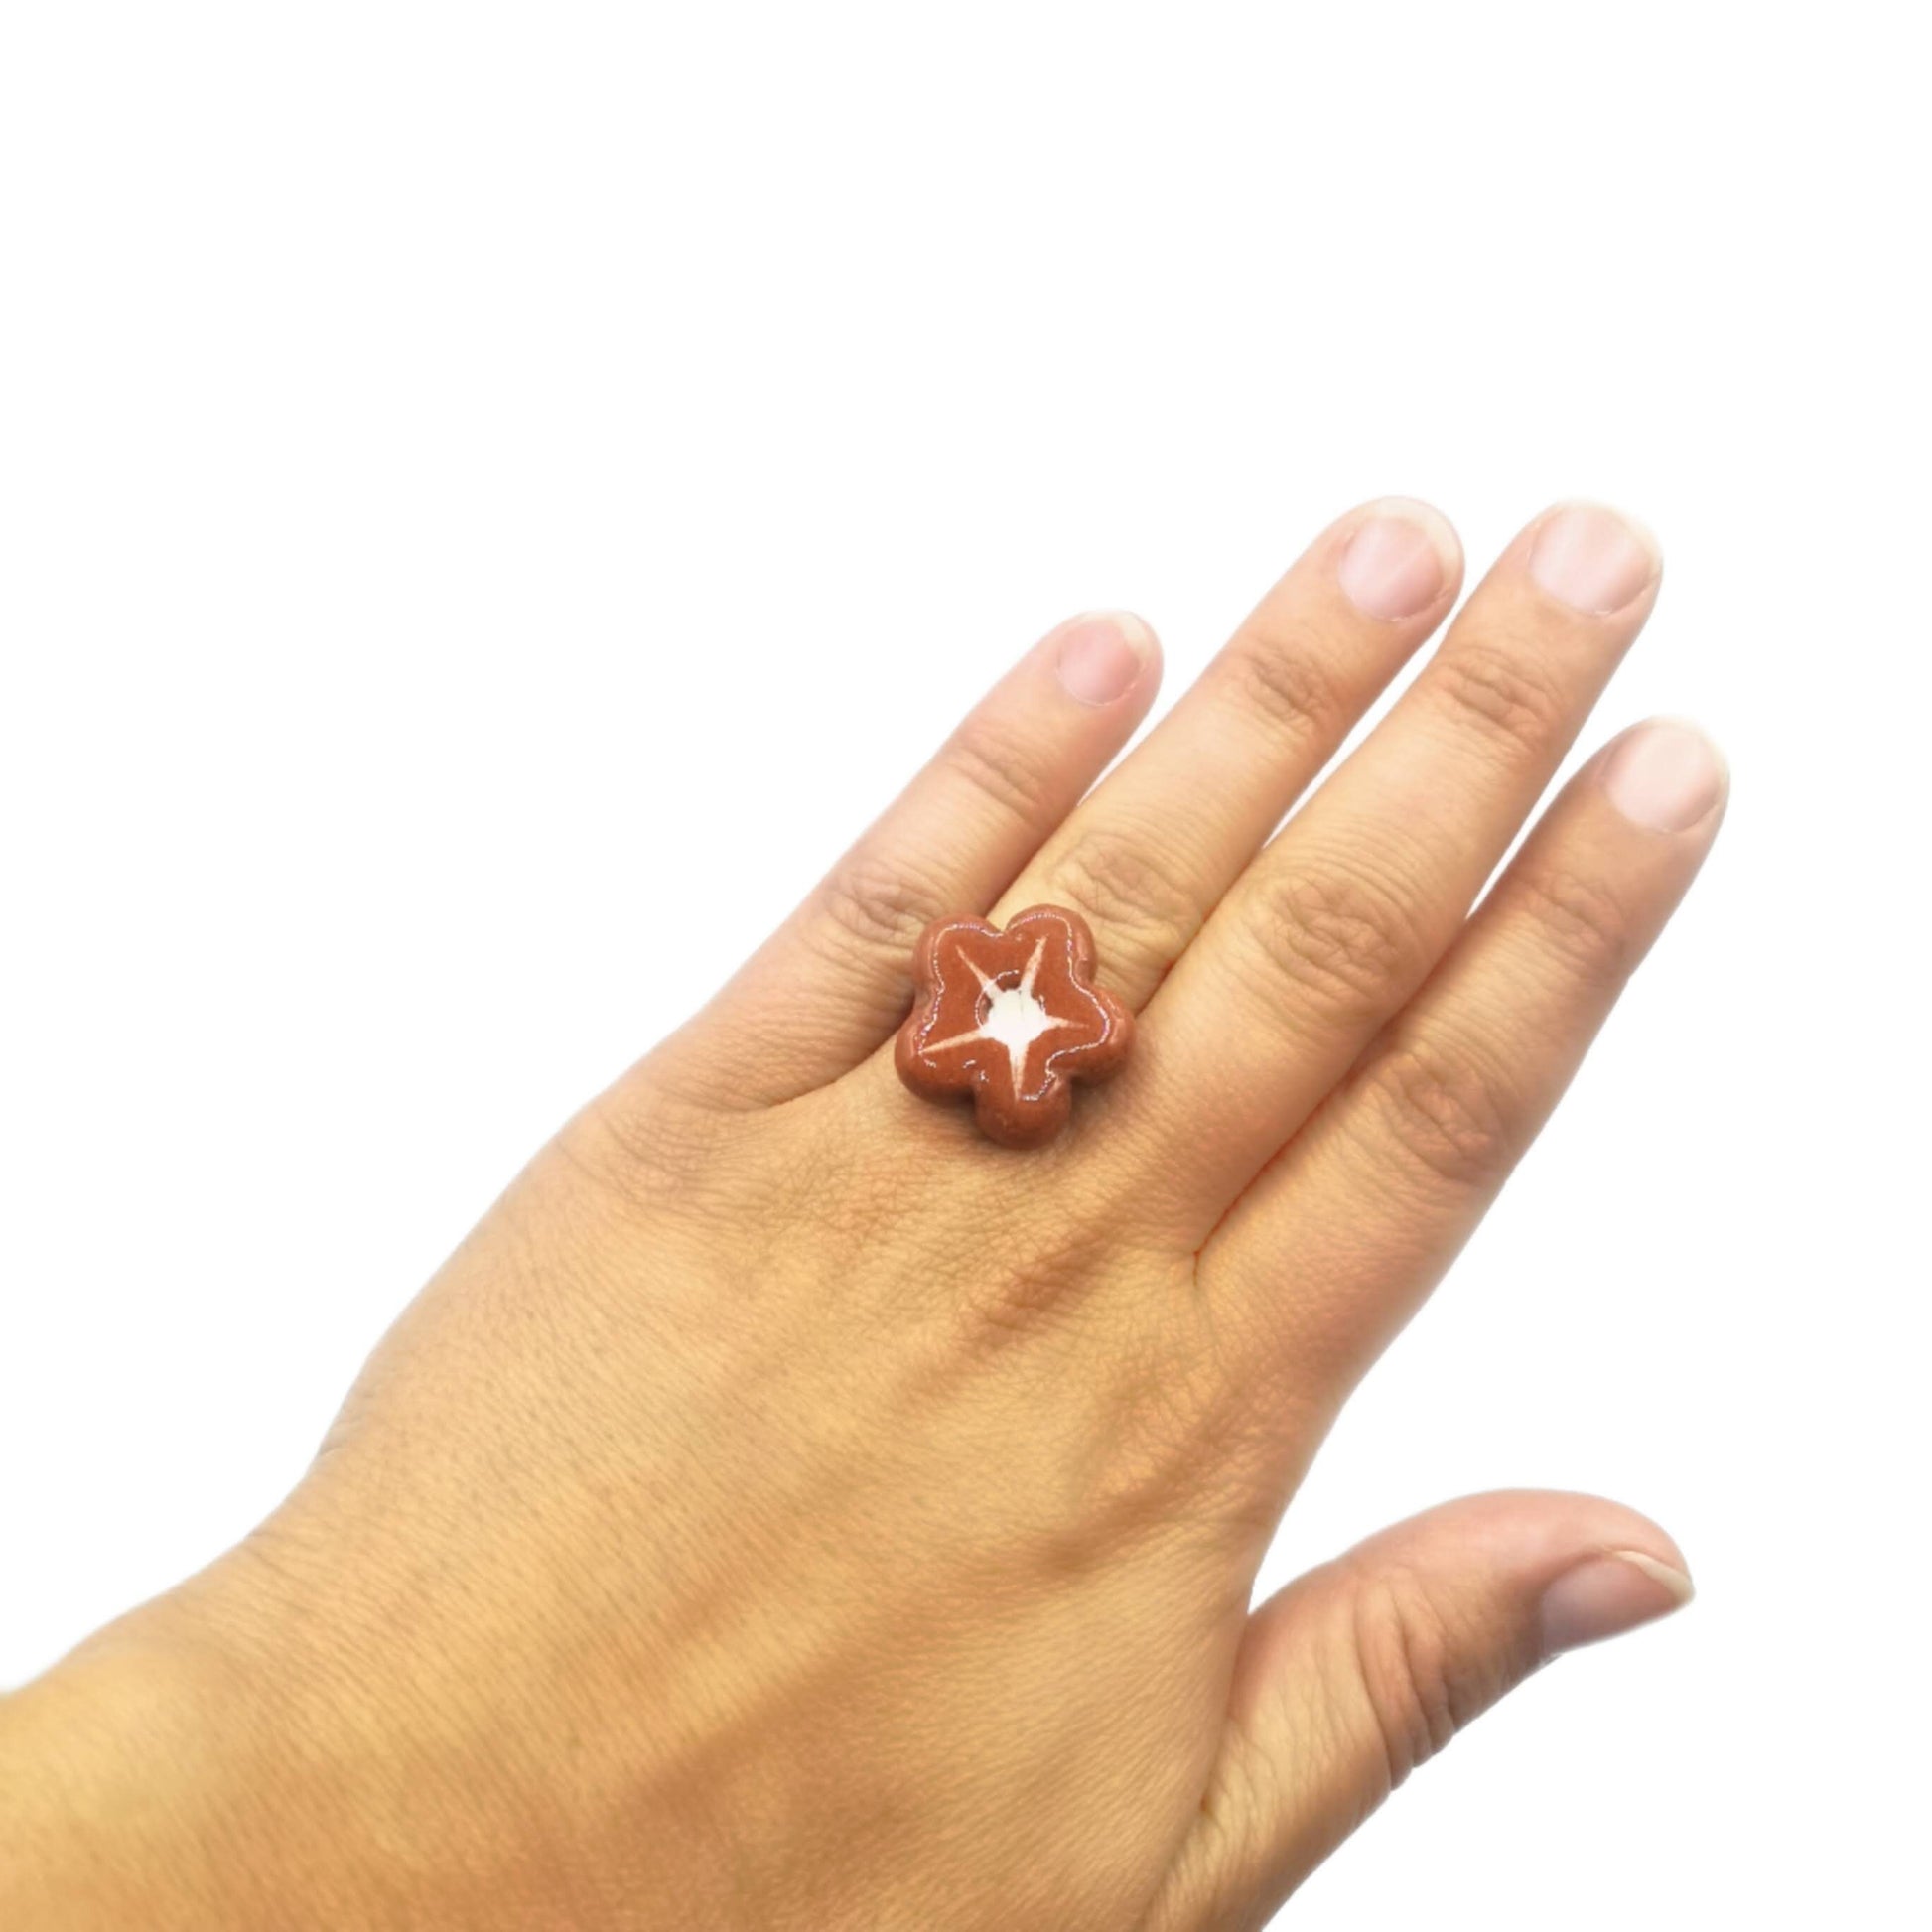 Handmade Large Statement Terracotta Flower Ring For Women, Unique Stainless Steel Adjustable Ring, Best Birthday Gifts For Her - Ceramica Ana Rafael